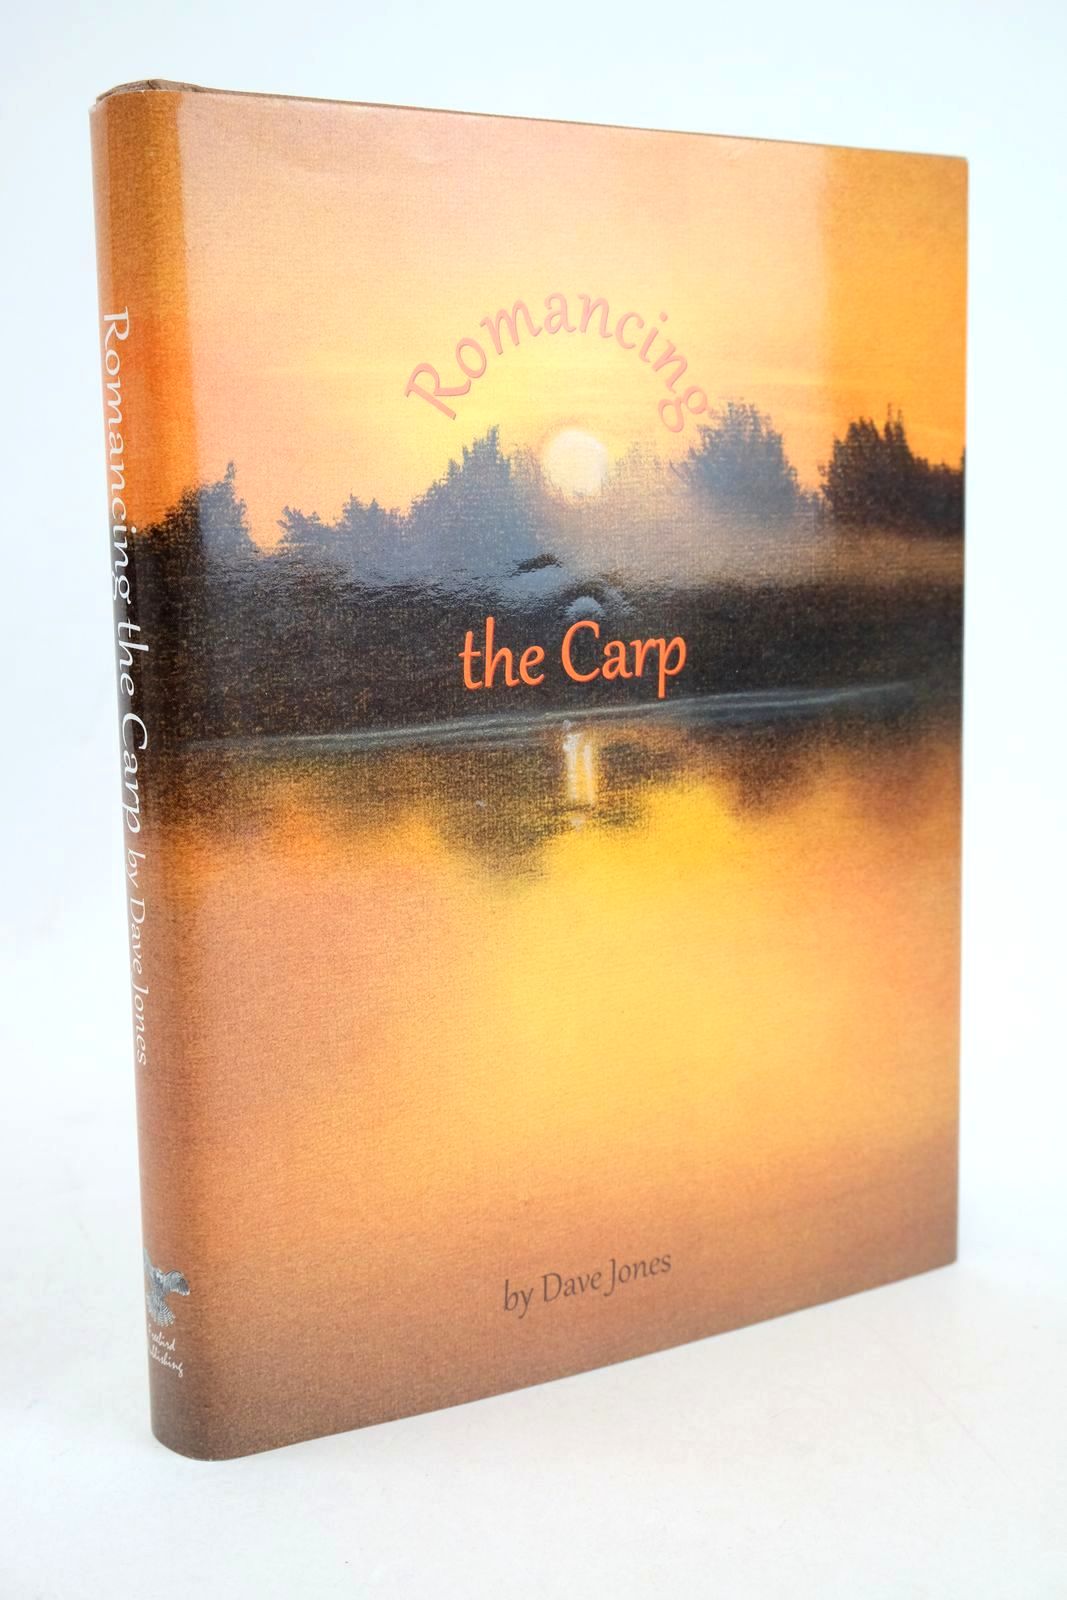 Photo of ROMANCING THE CARP written by Jones, Dave illustrated by Jones, Barbara published by Freebird Publishing (STOCK CODE: 1327646)  for sale by Stella & Rose's Books